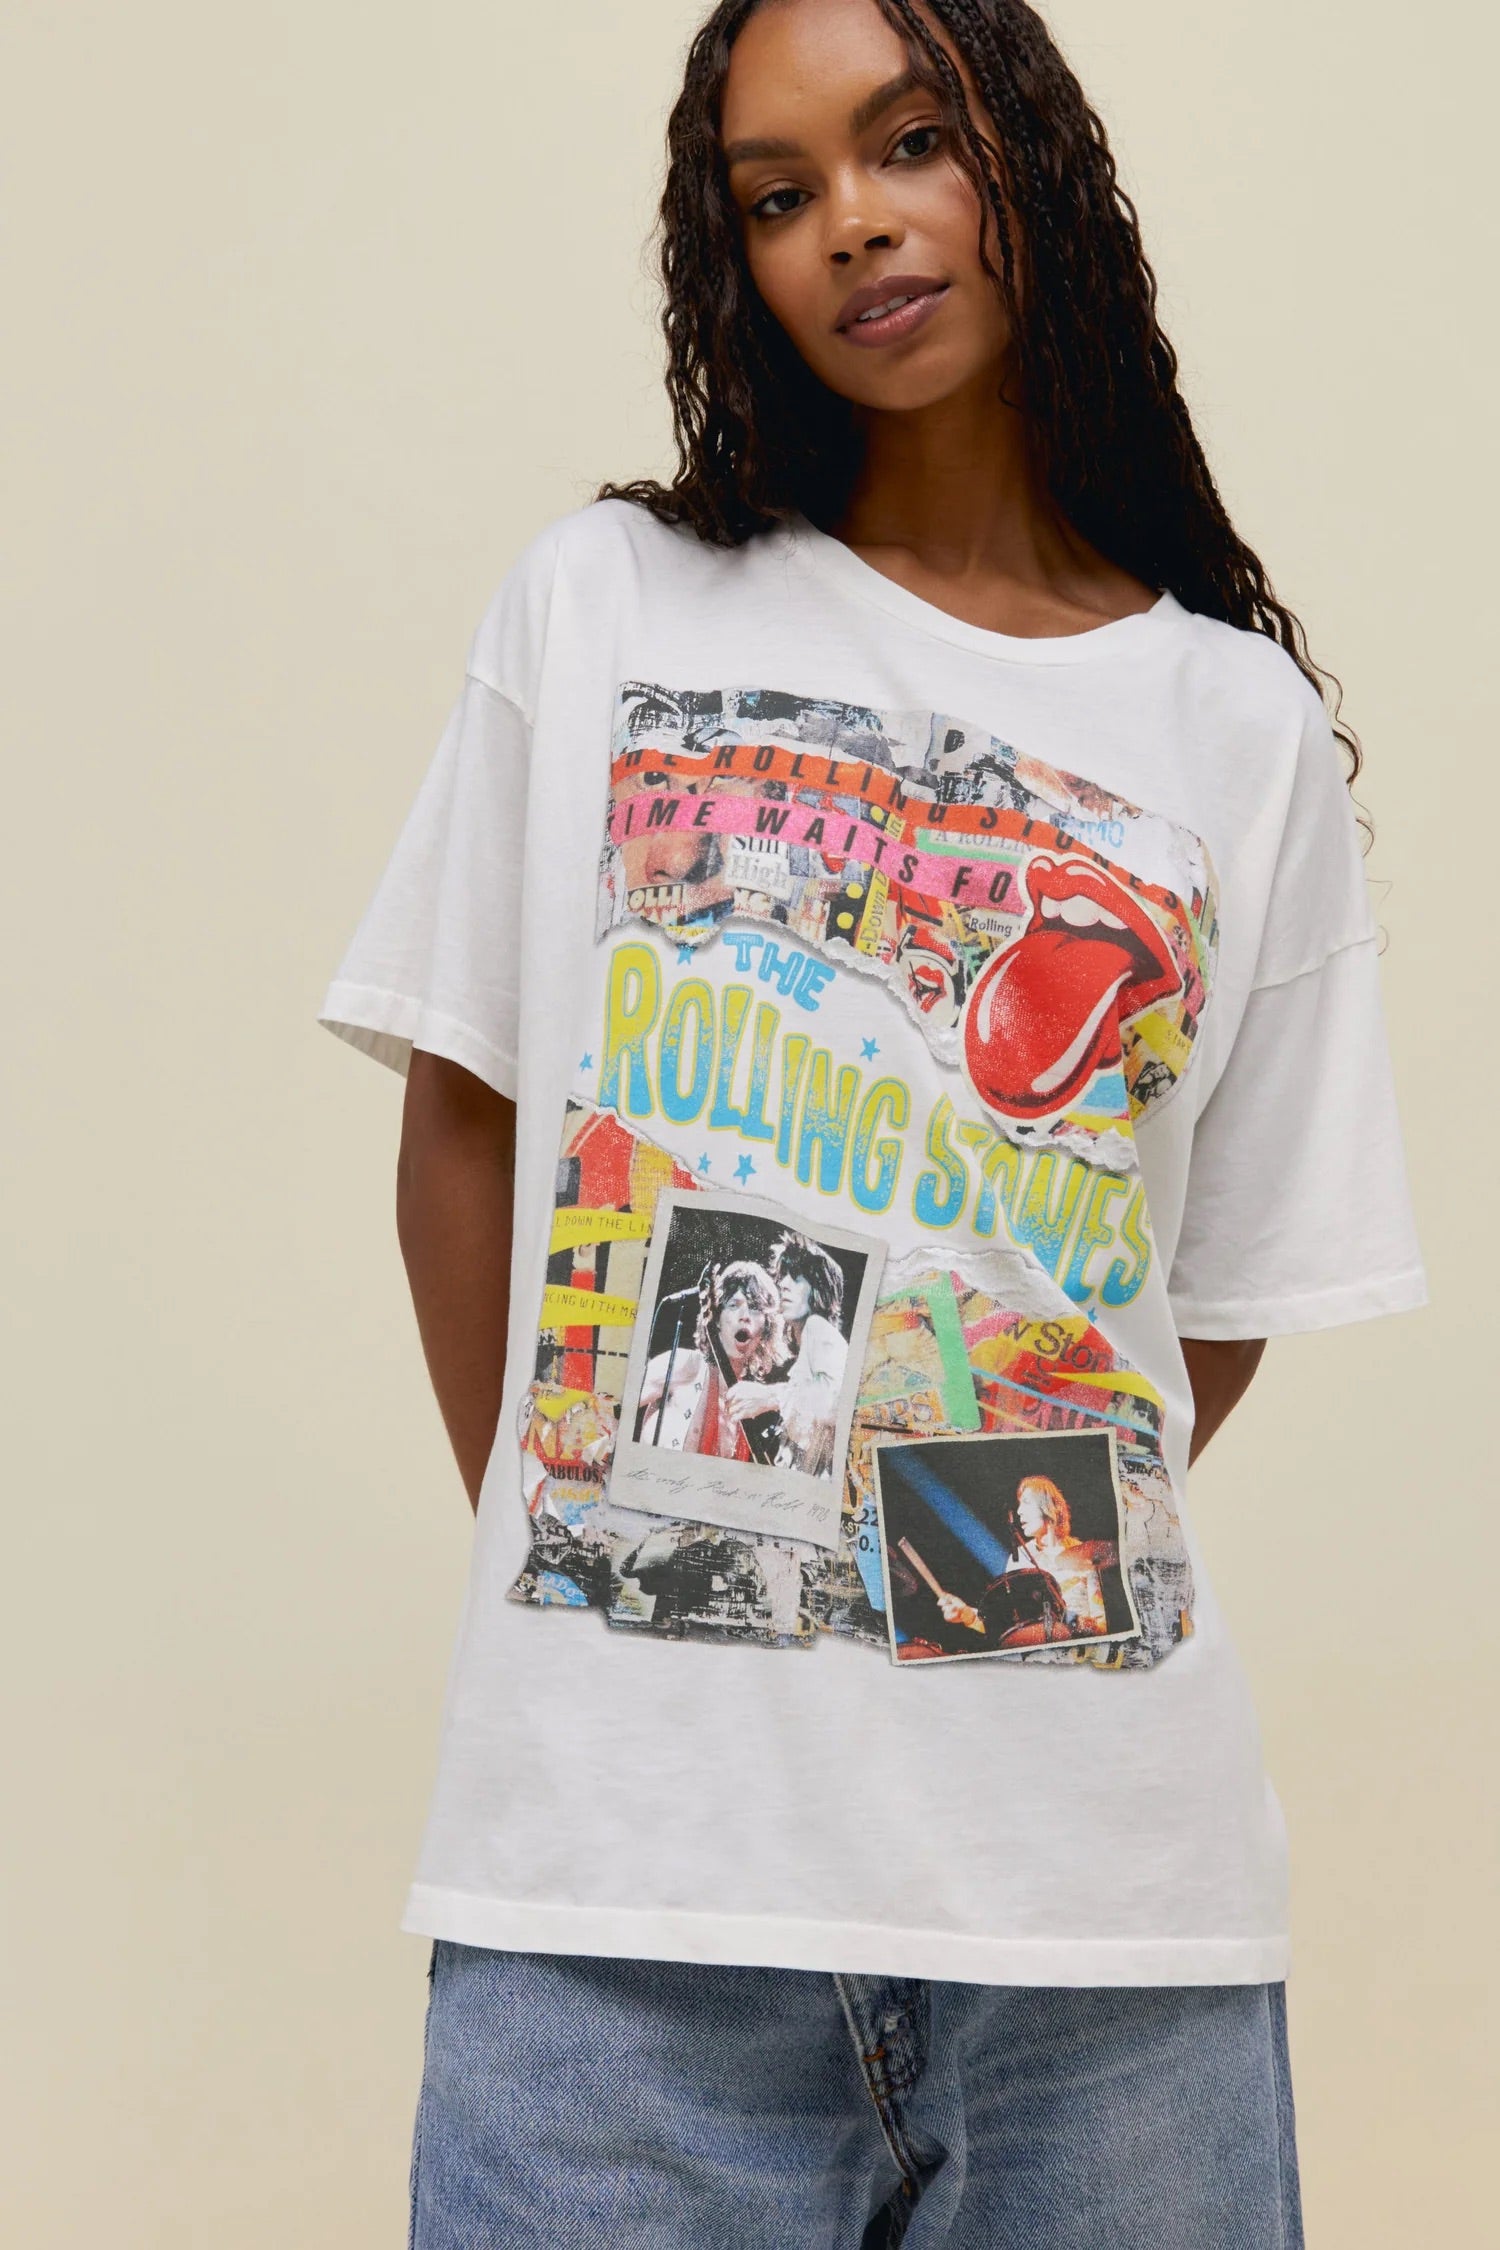 Rolling Stones Time Waist For No One Merch White Tee 